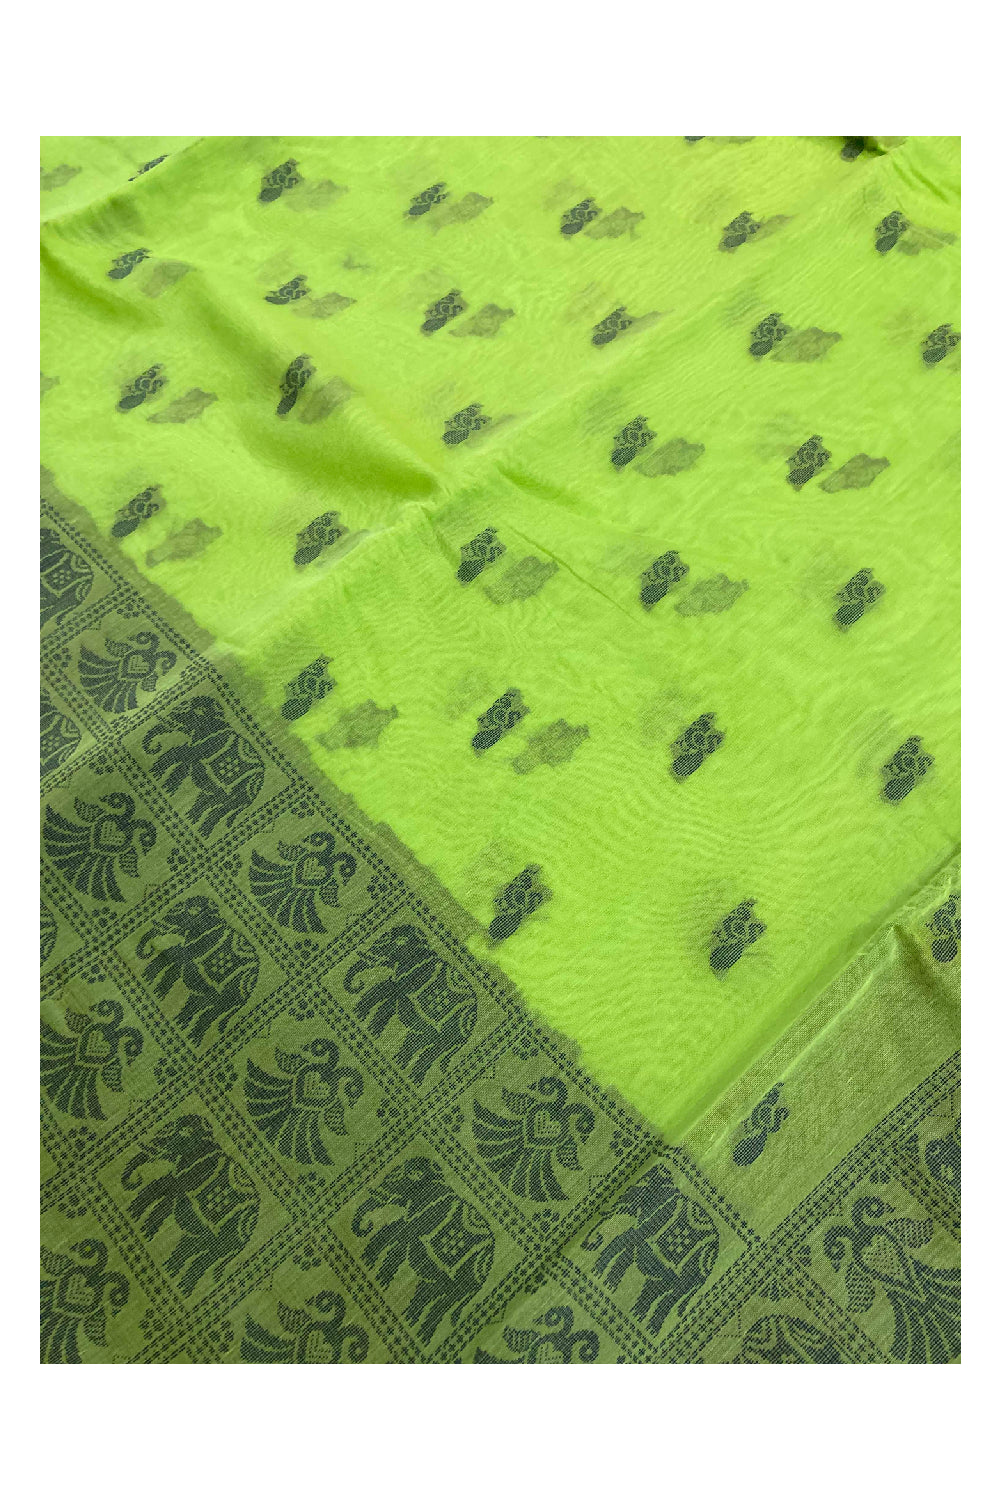 Southloom Sico Gadwal Semi Silk Sarees in Light Green and Green with Elephant Motifts (Blouse Piece with Work)